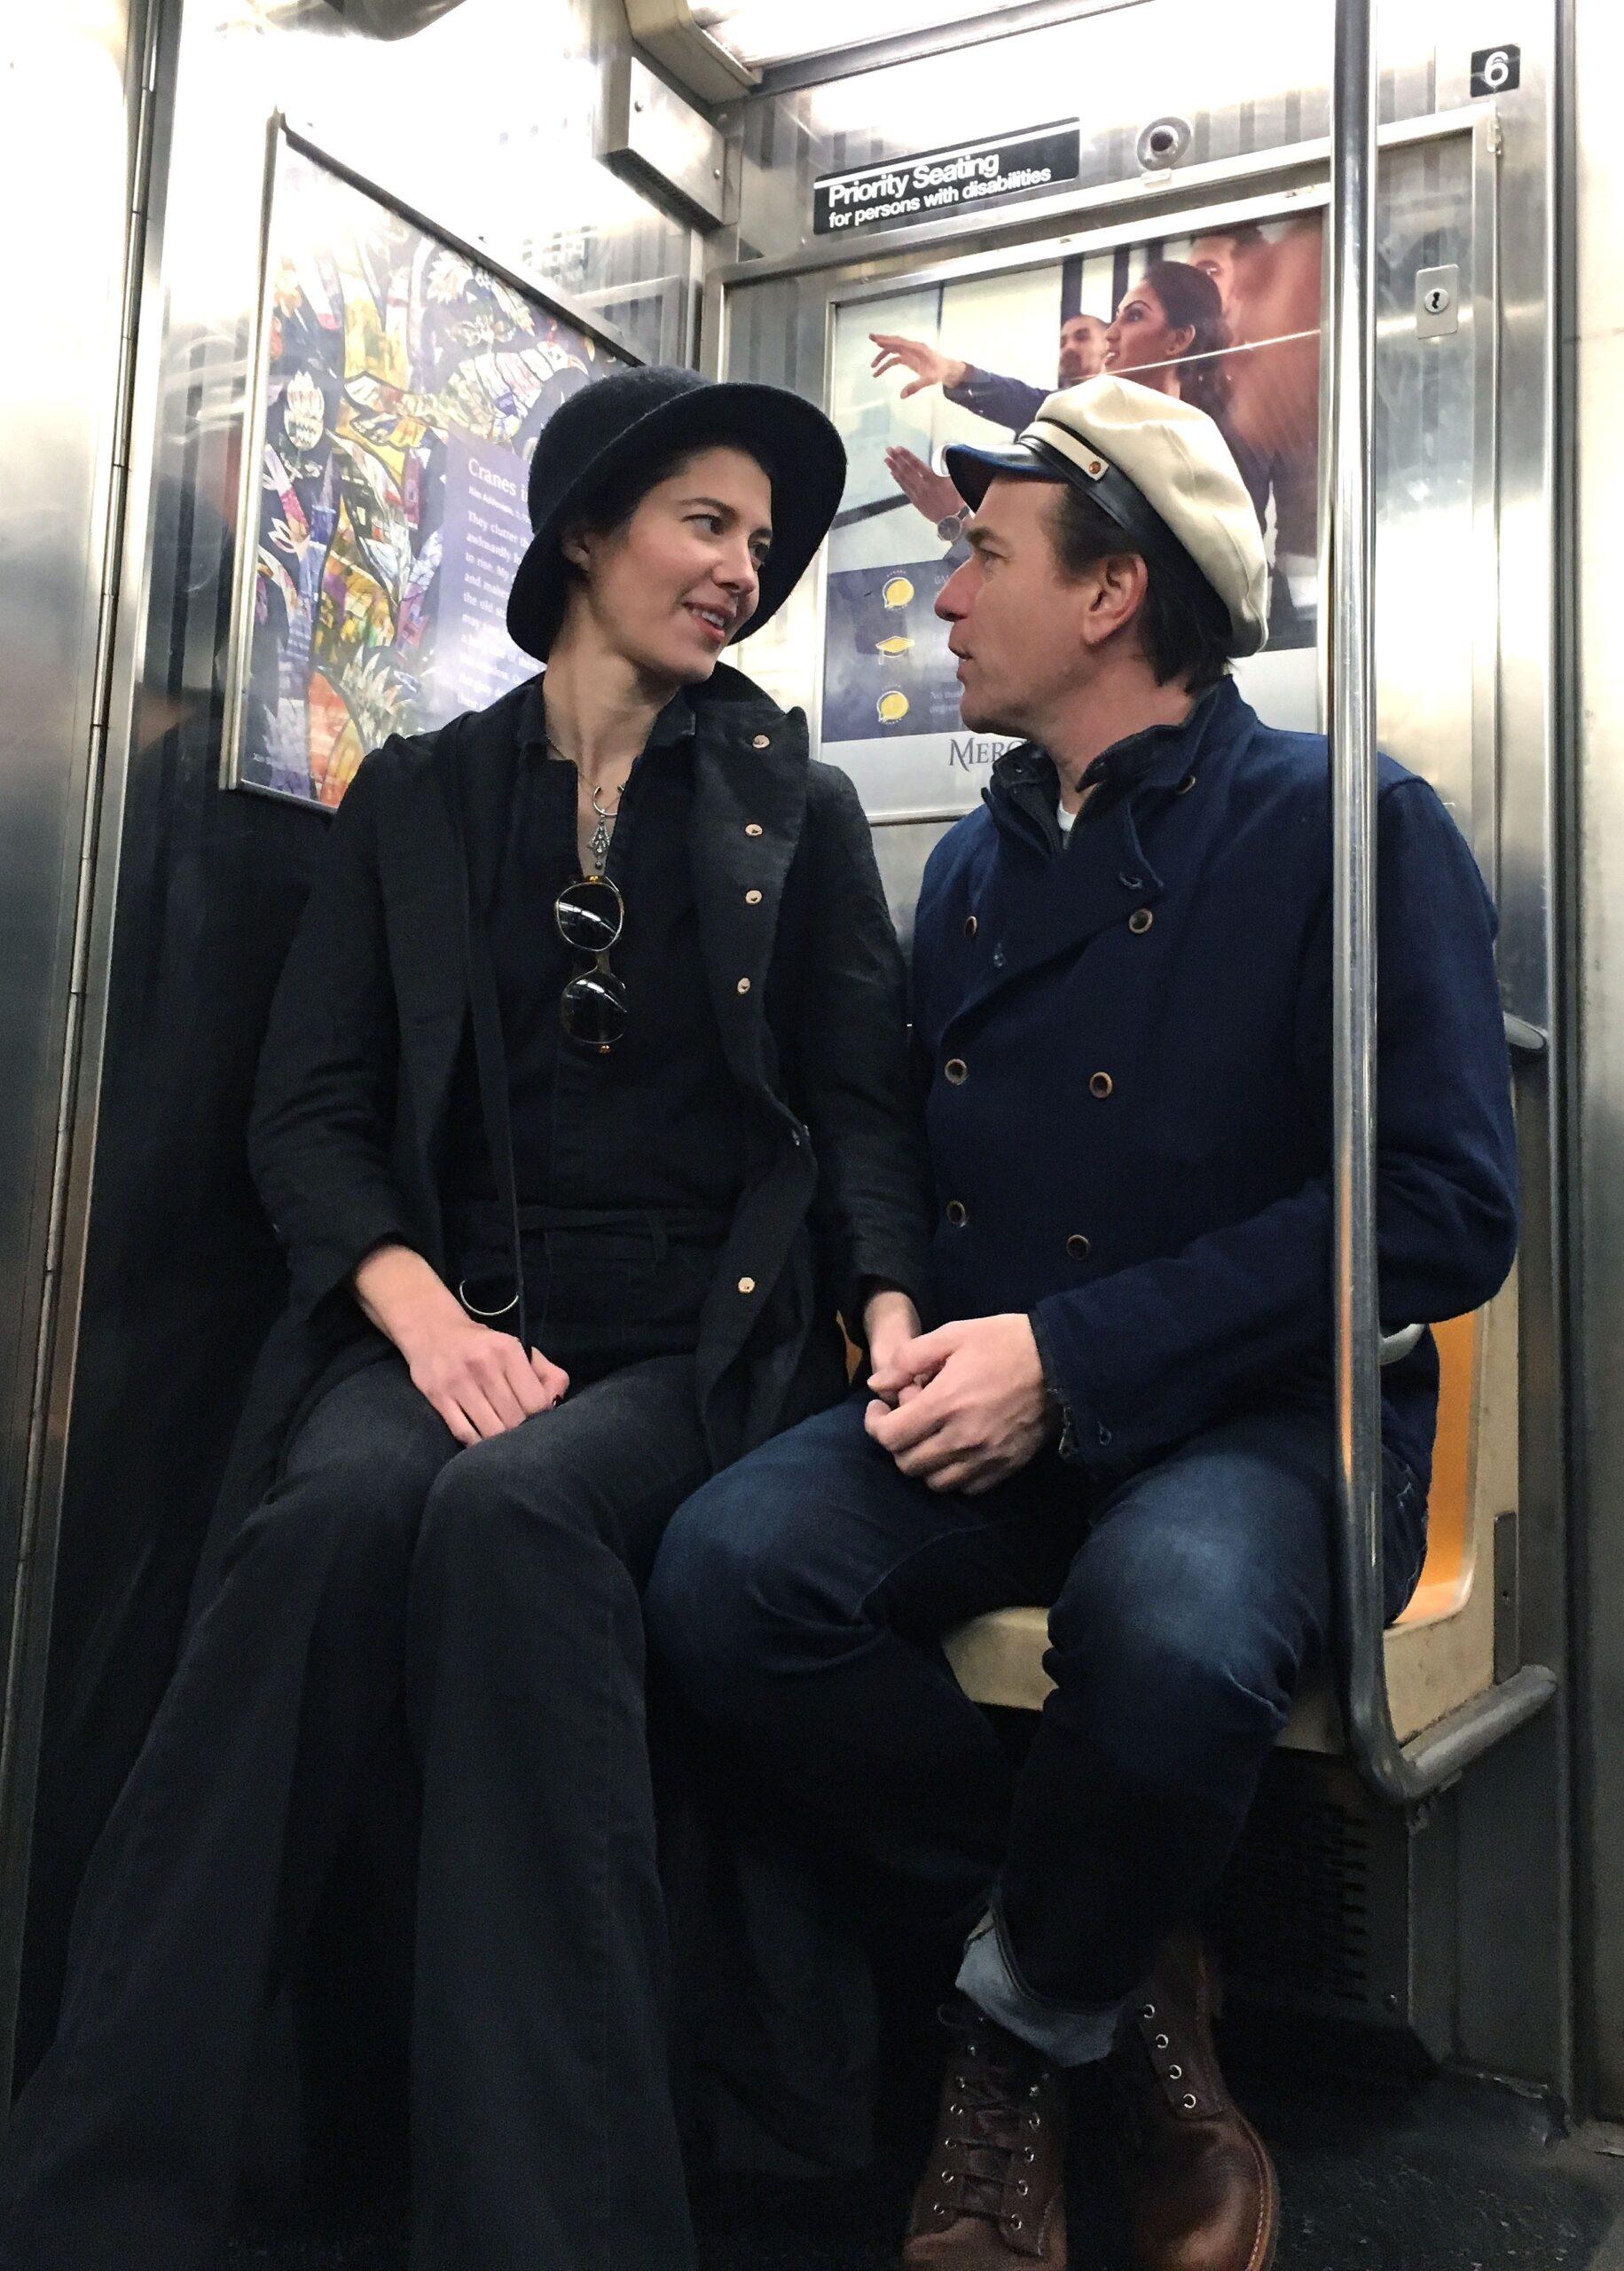 Ewan McGregor and girlfriend Mary Elizabeth Winstead kiss and hold hands while riding the Subway in NYC